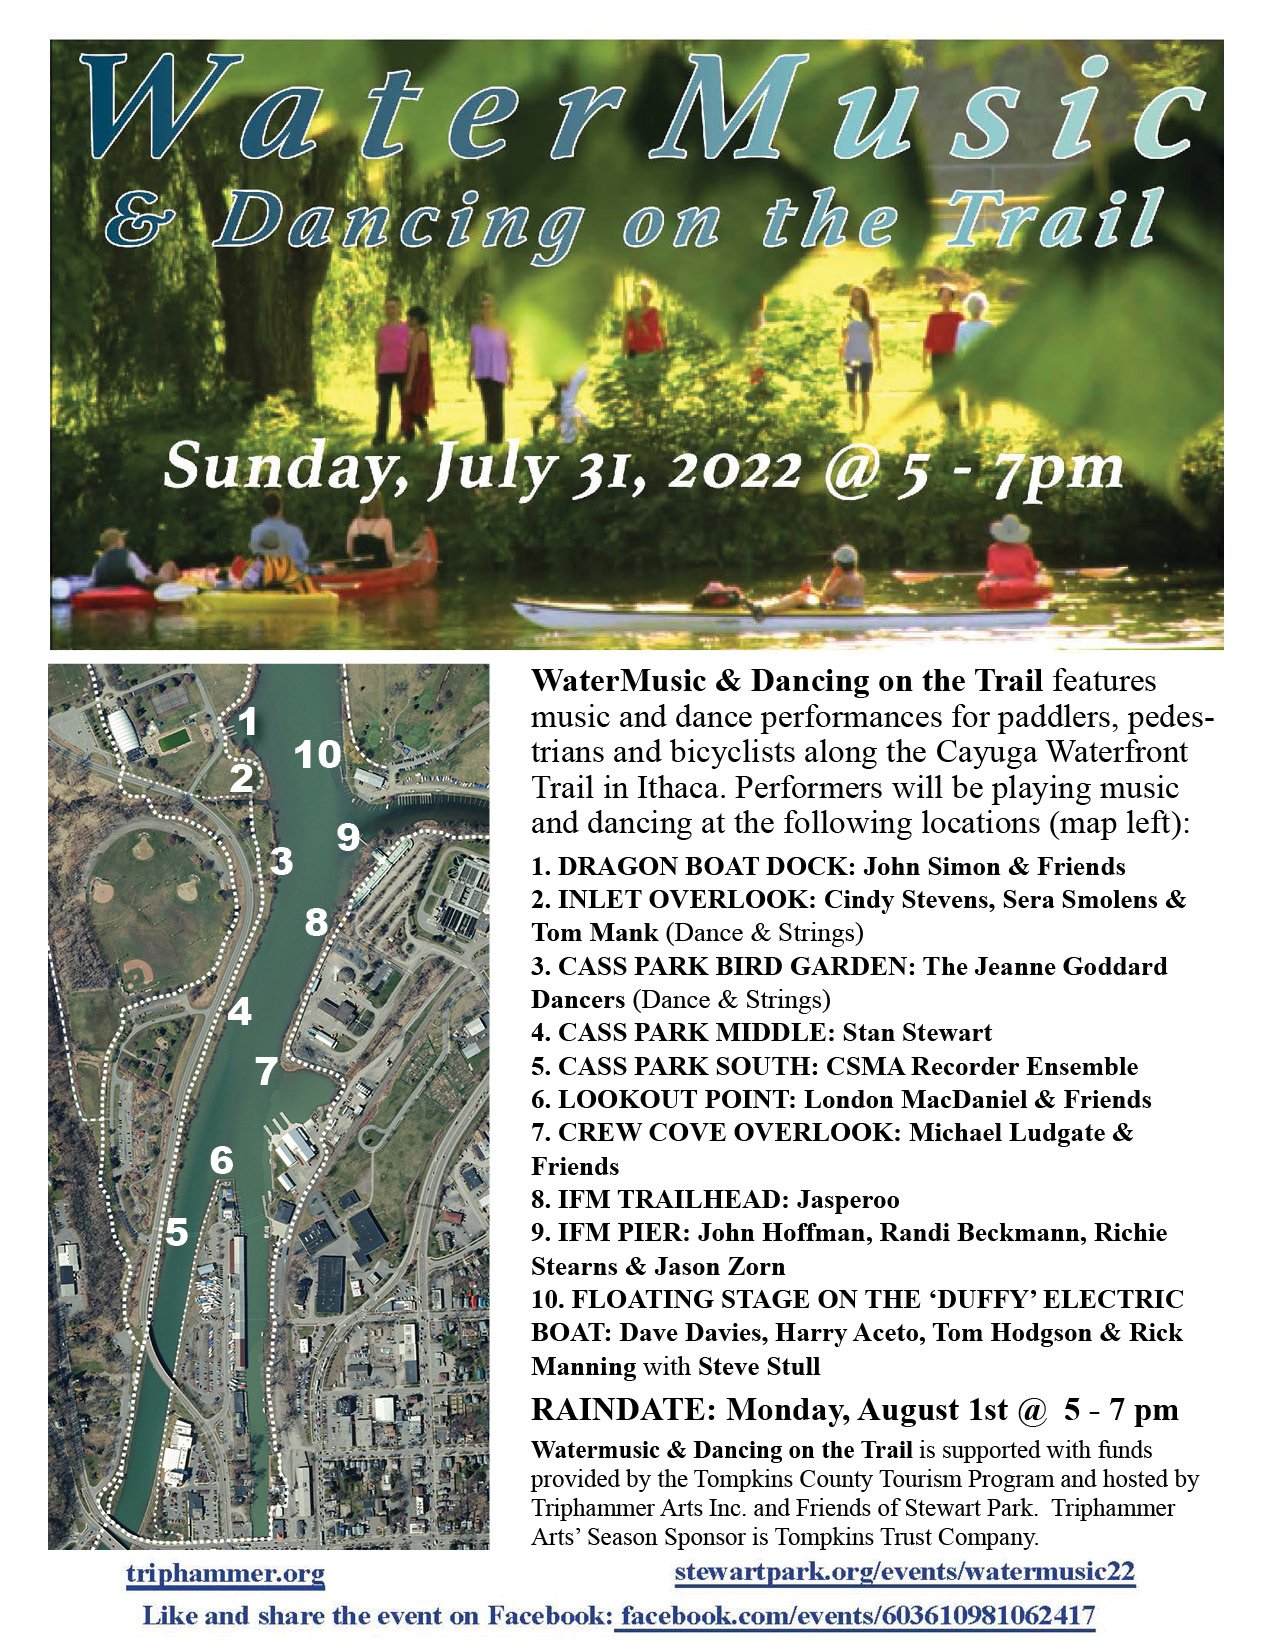 WaterMusic & Dancing on the Trail — Friends of Stewart Park